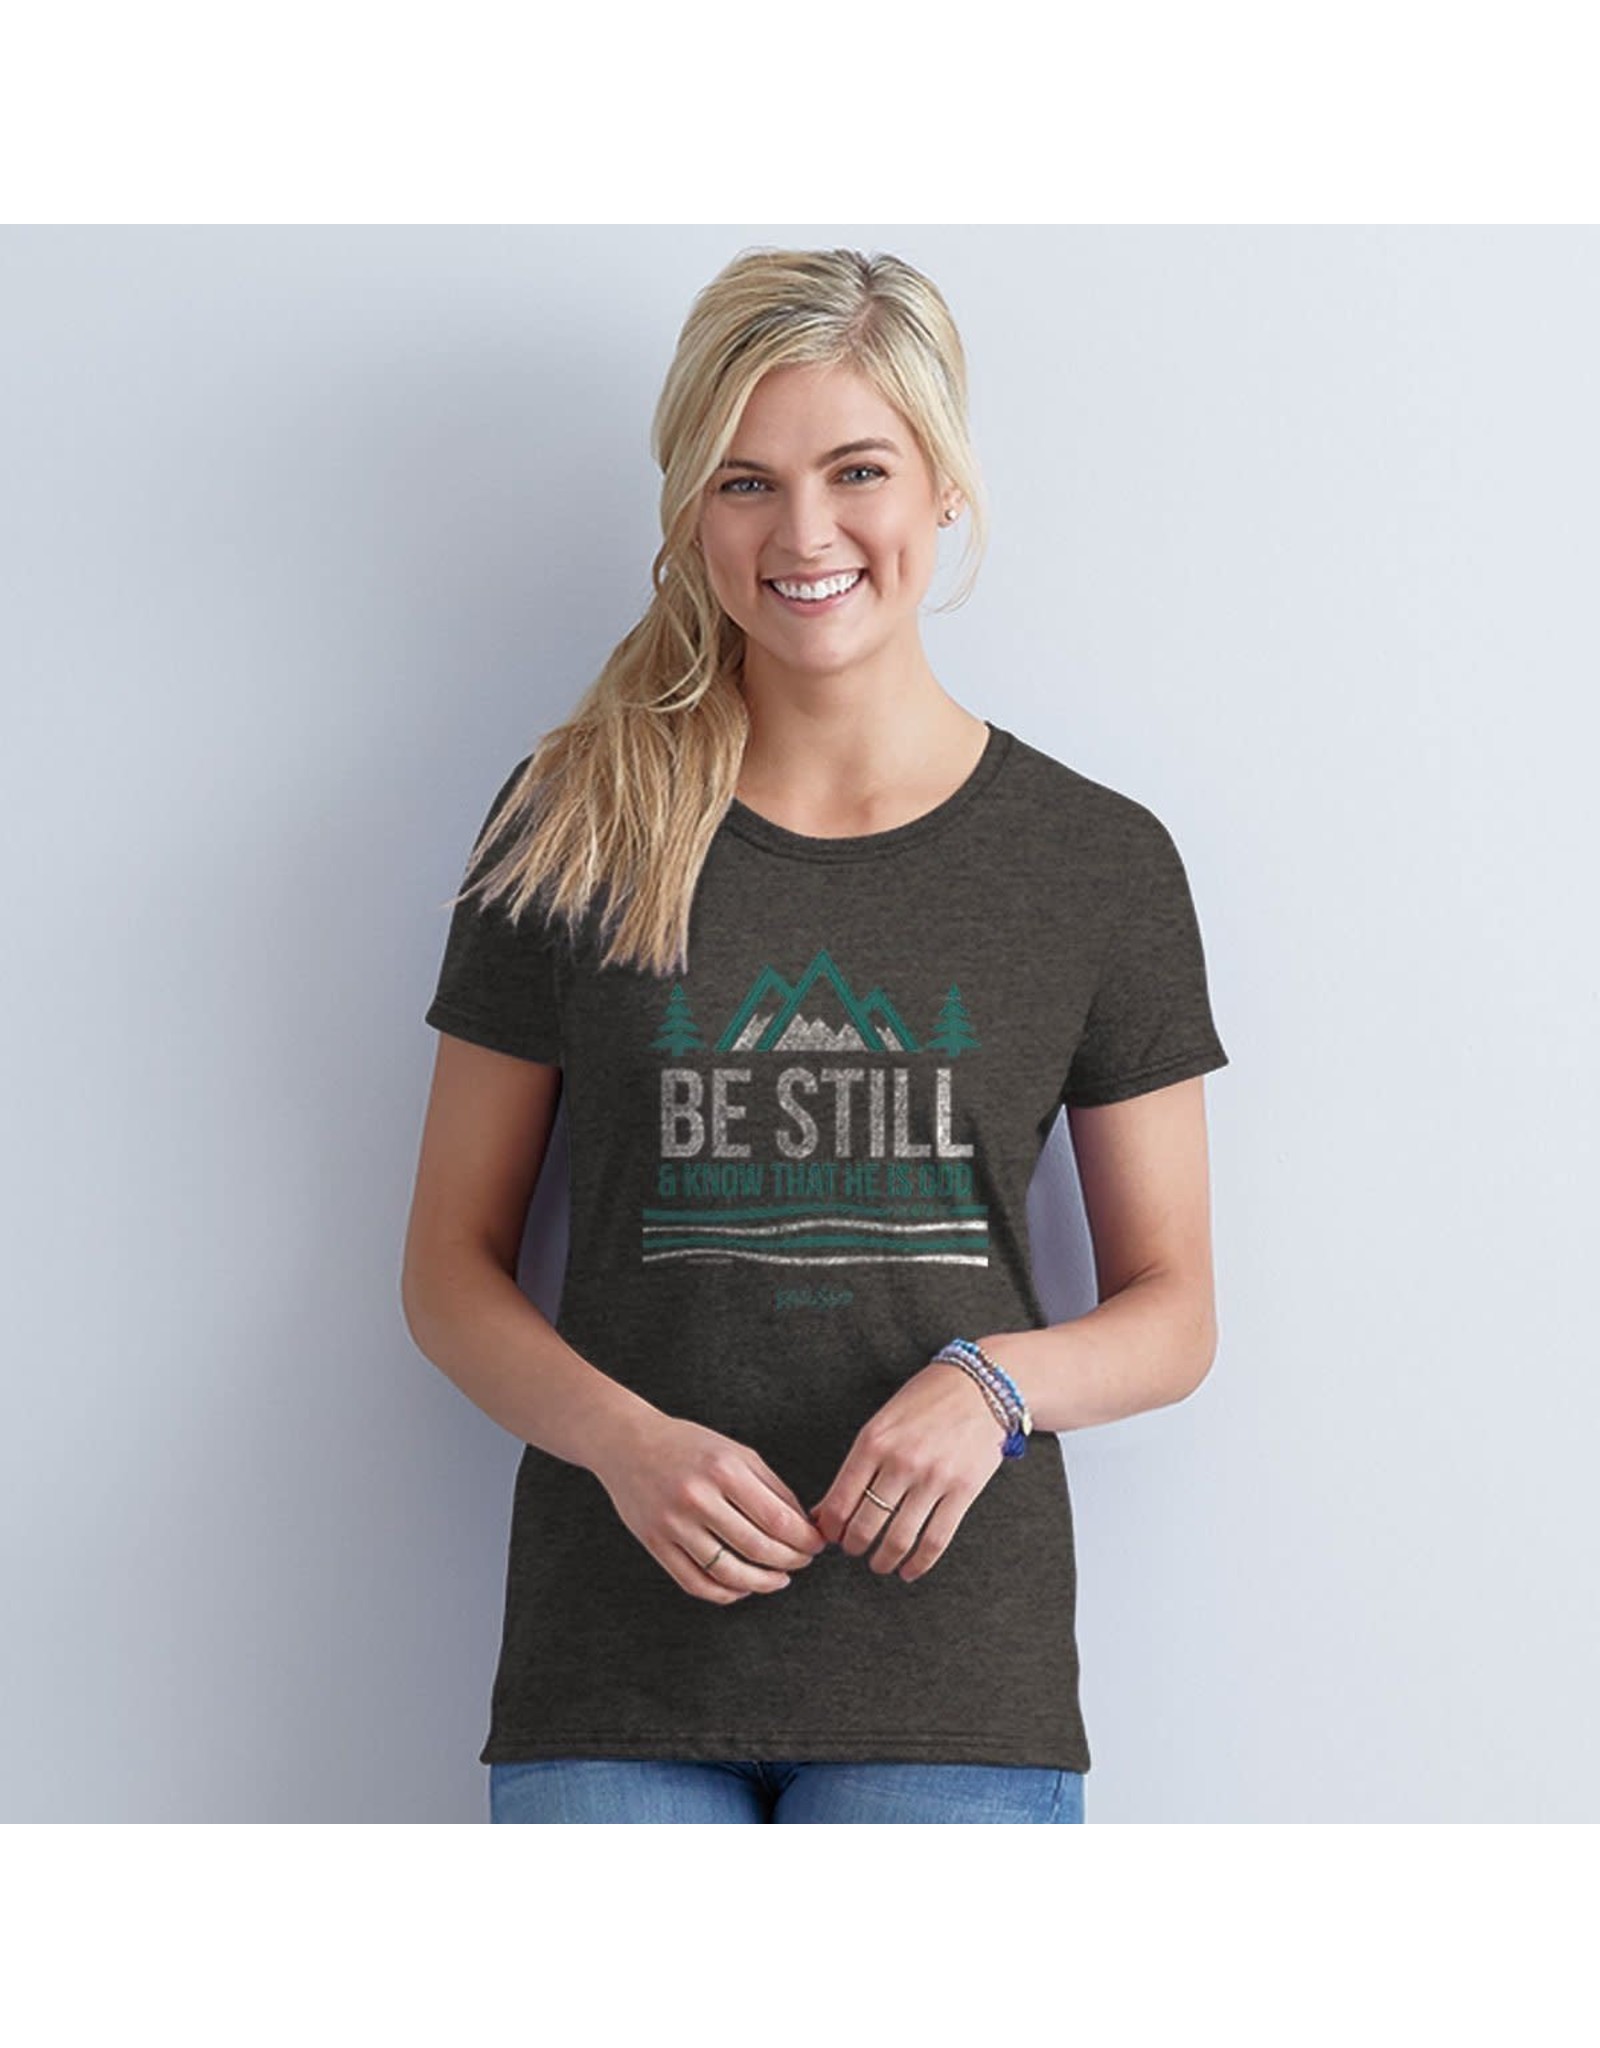 Kerusso Adult Shirt - Be Still and Know